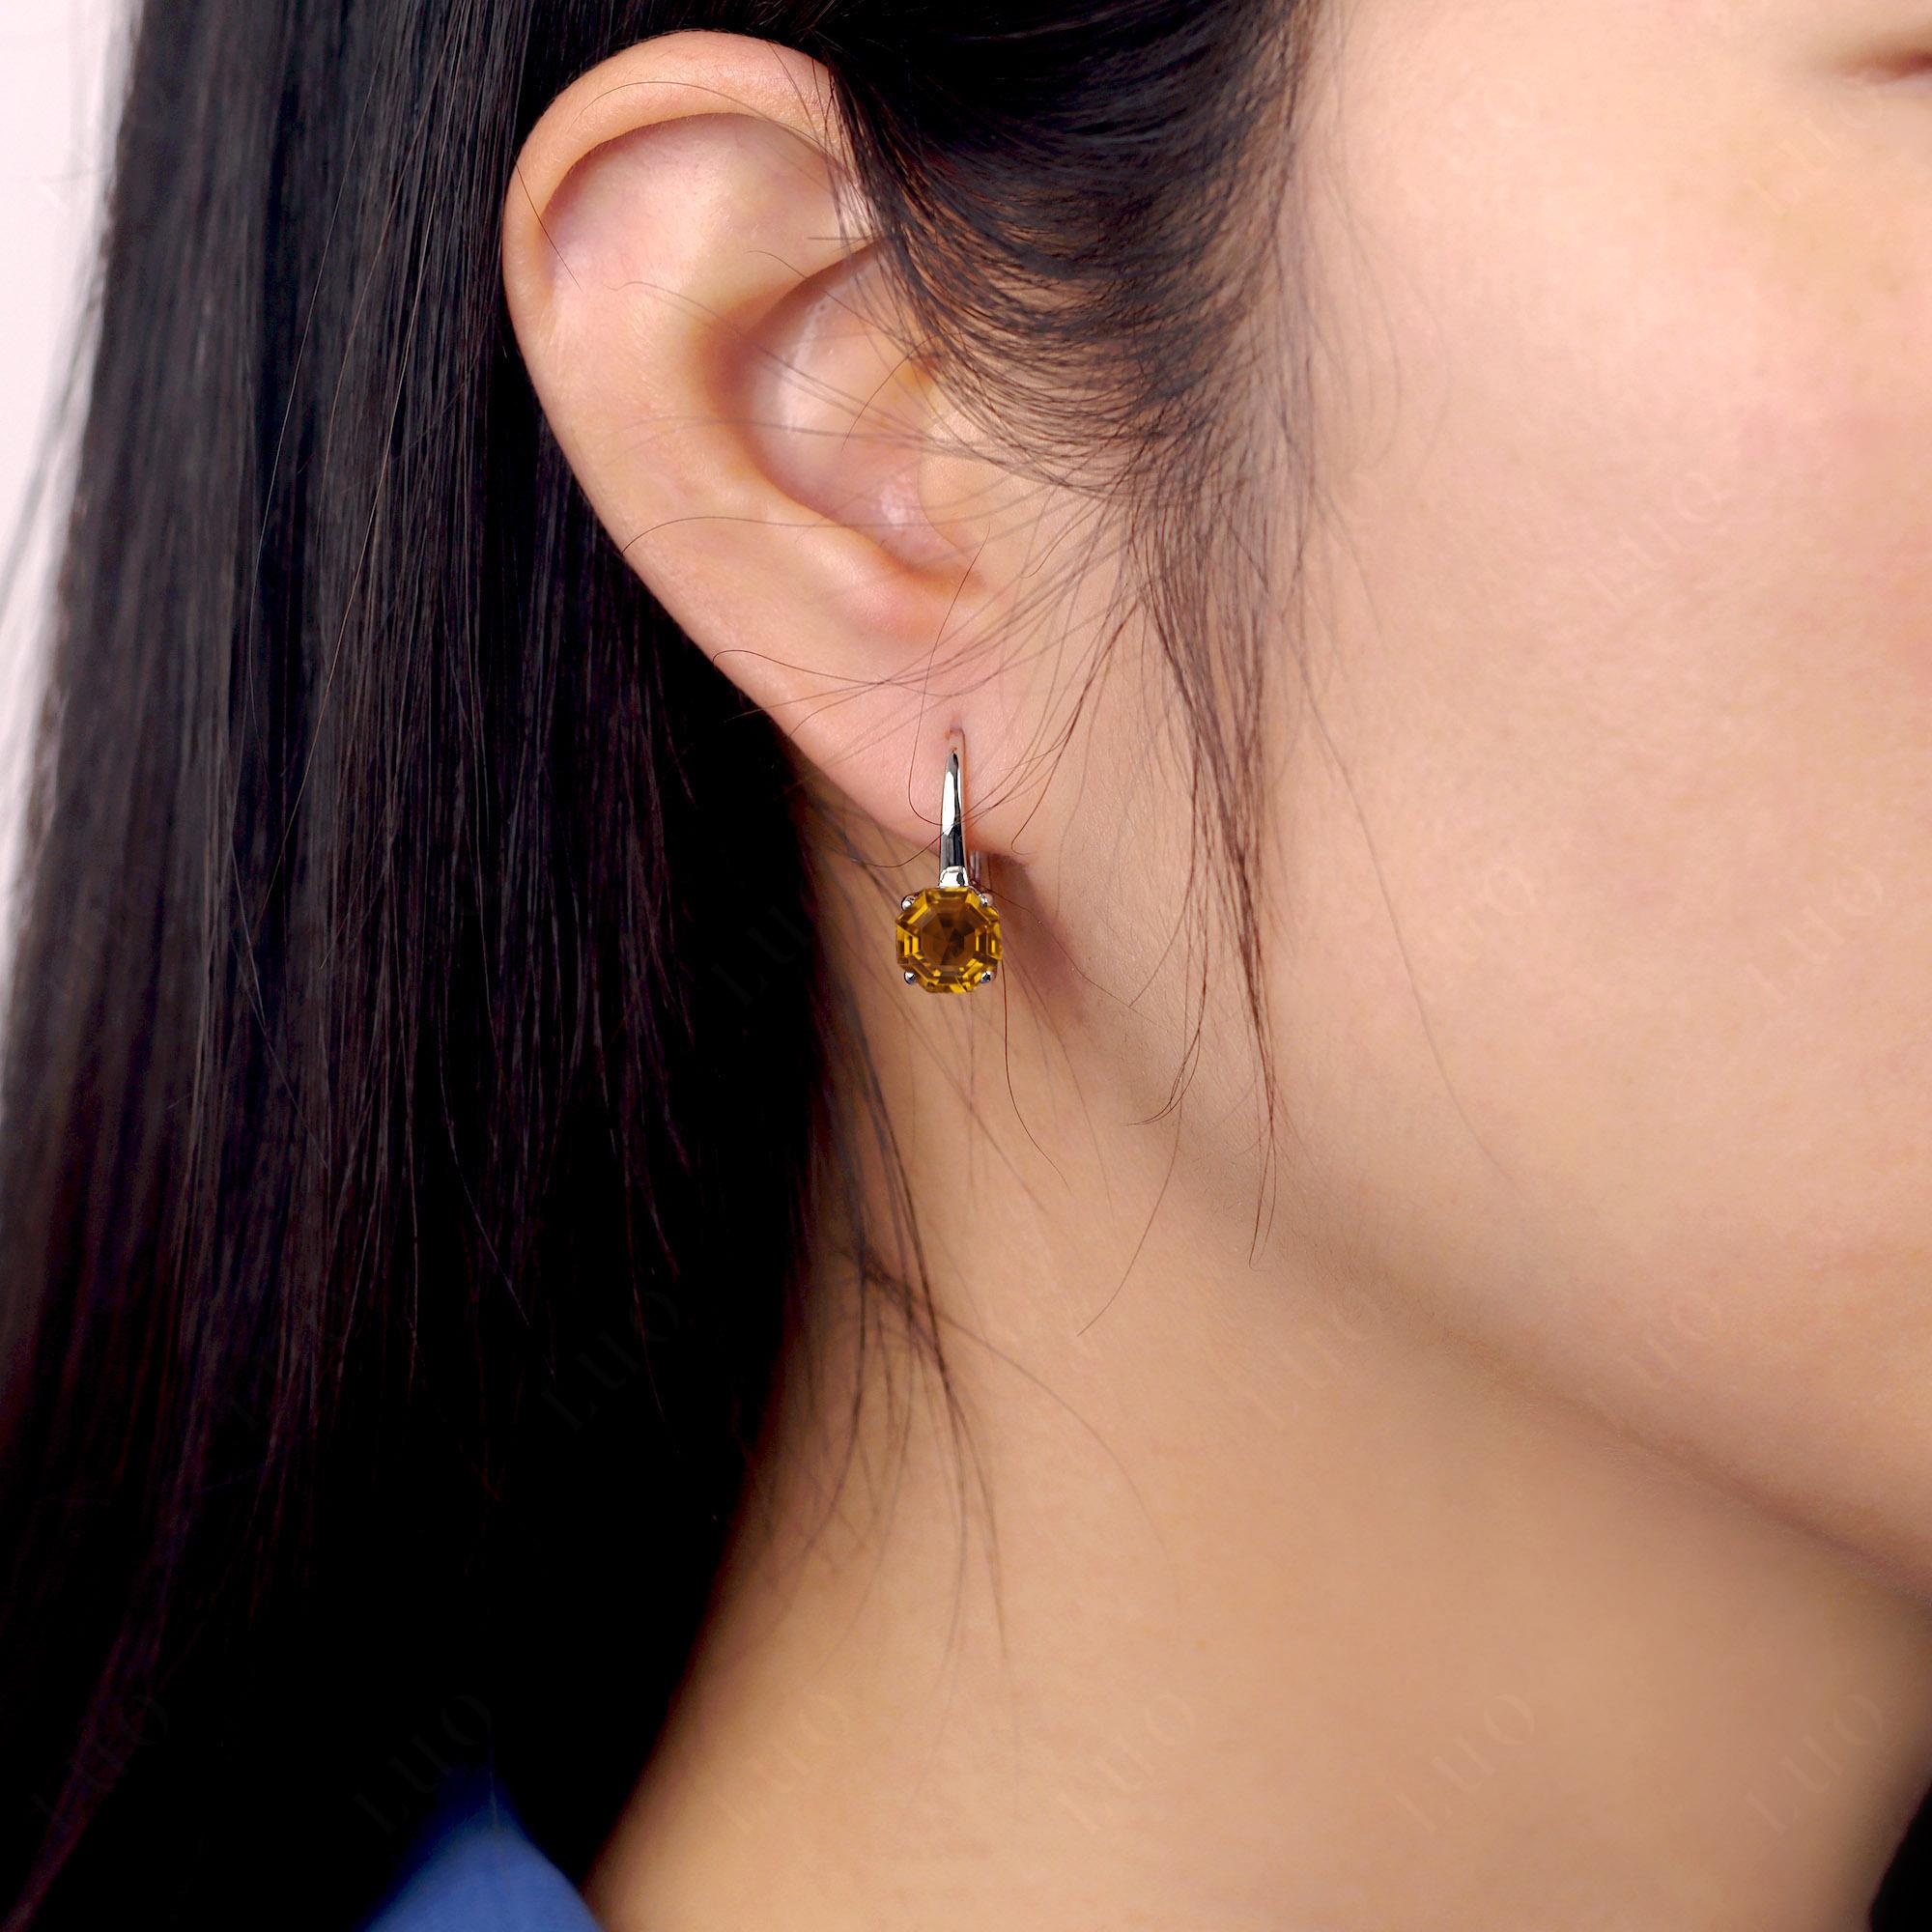 Octagon Cut Citrine Leverback Earrings - LUO Jewelry